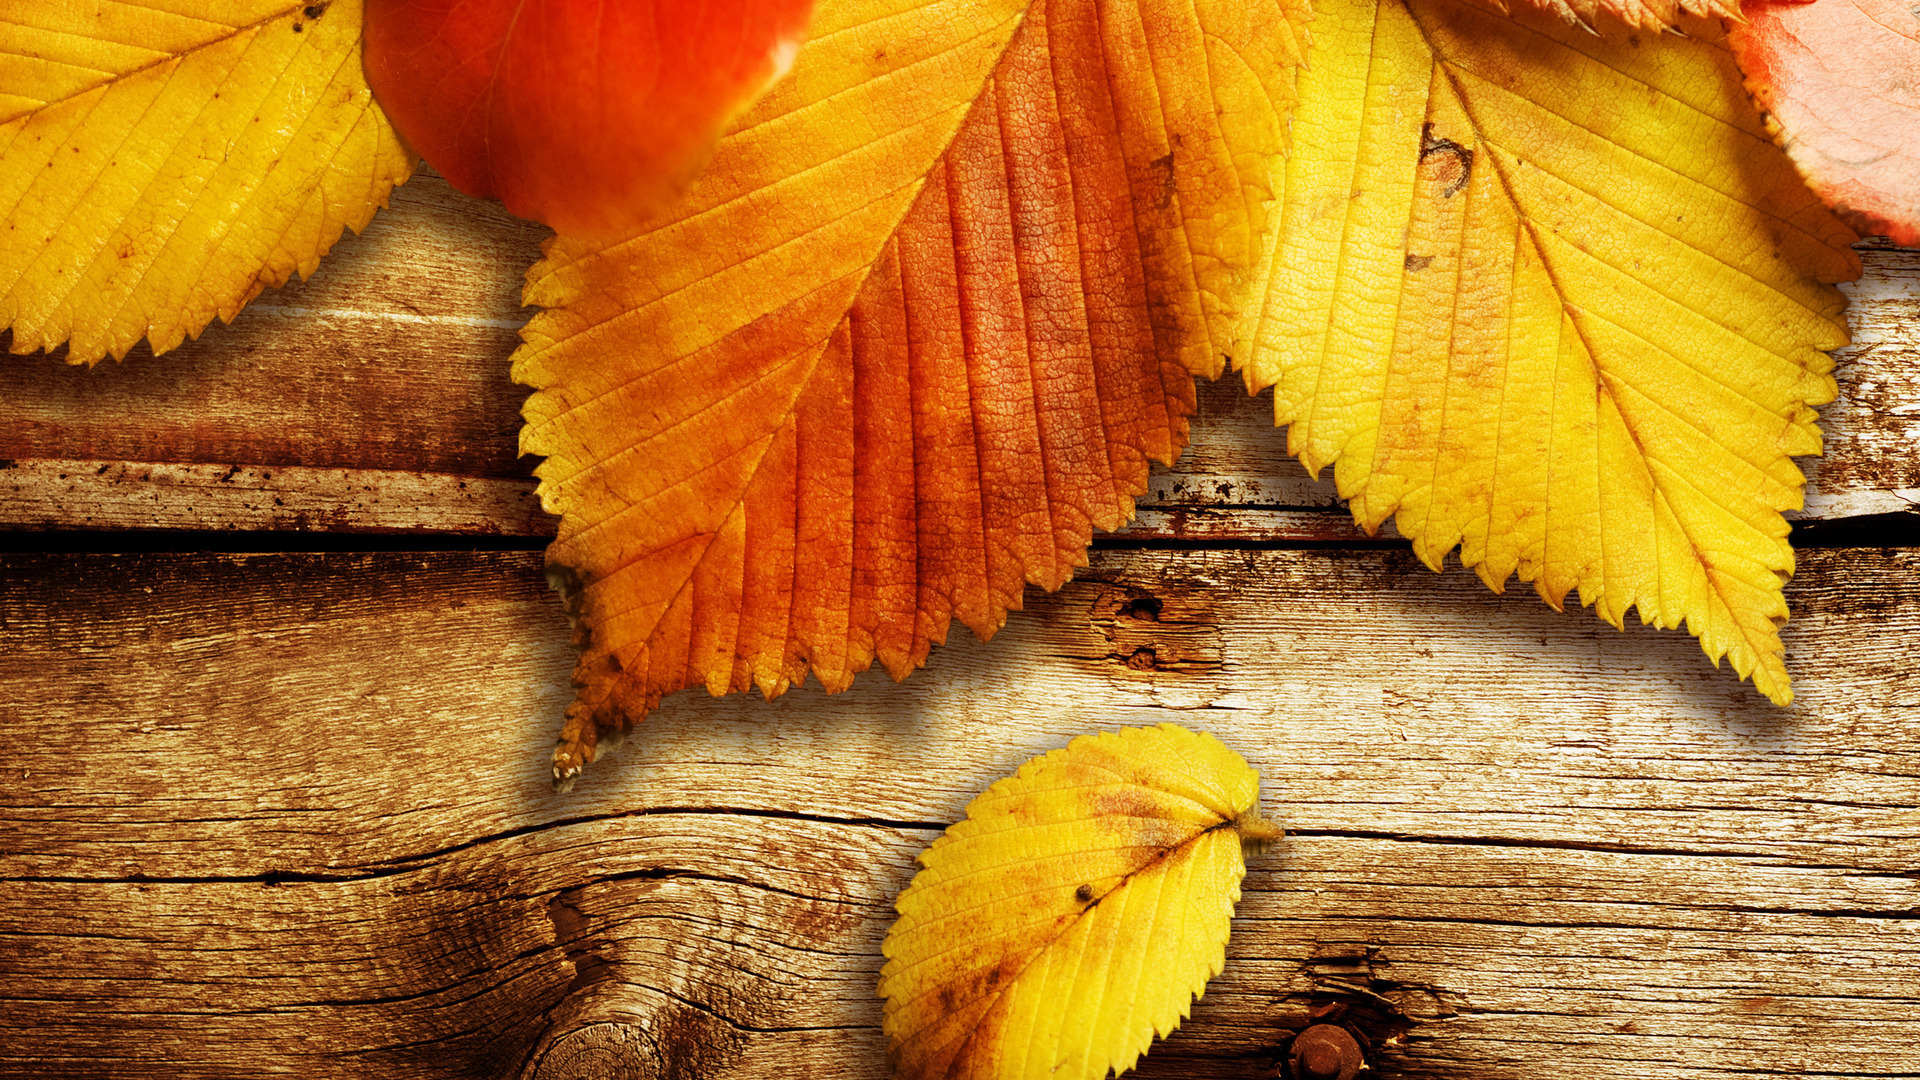 original wallpaper download: The autumn leaves on the wood - 1920x1080